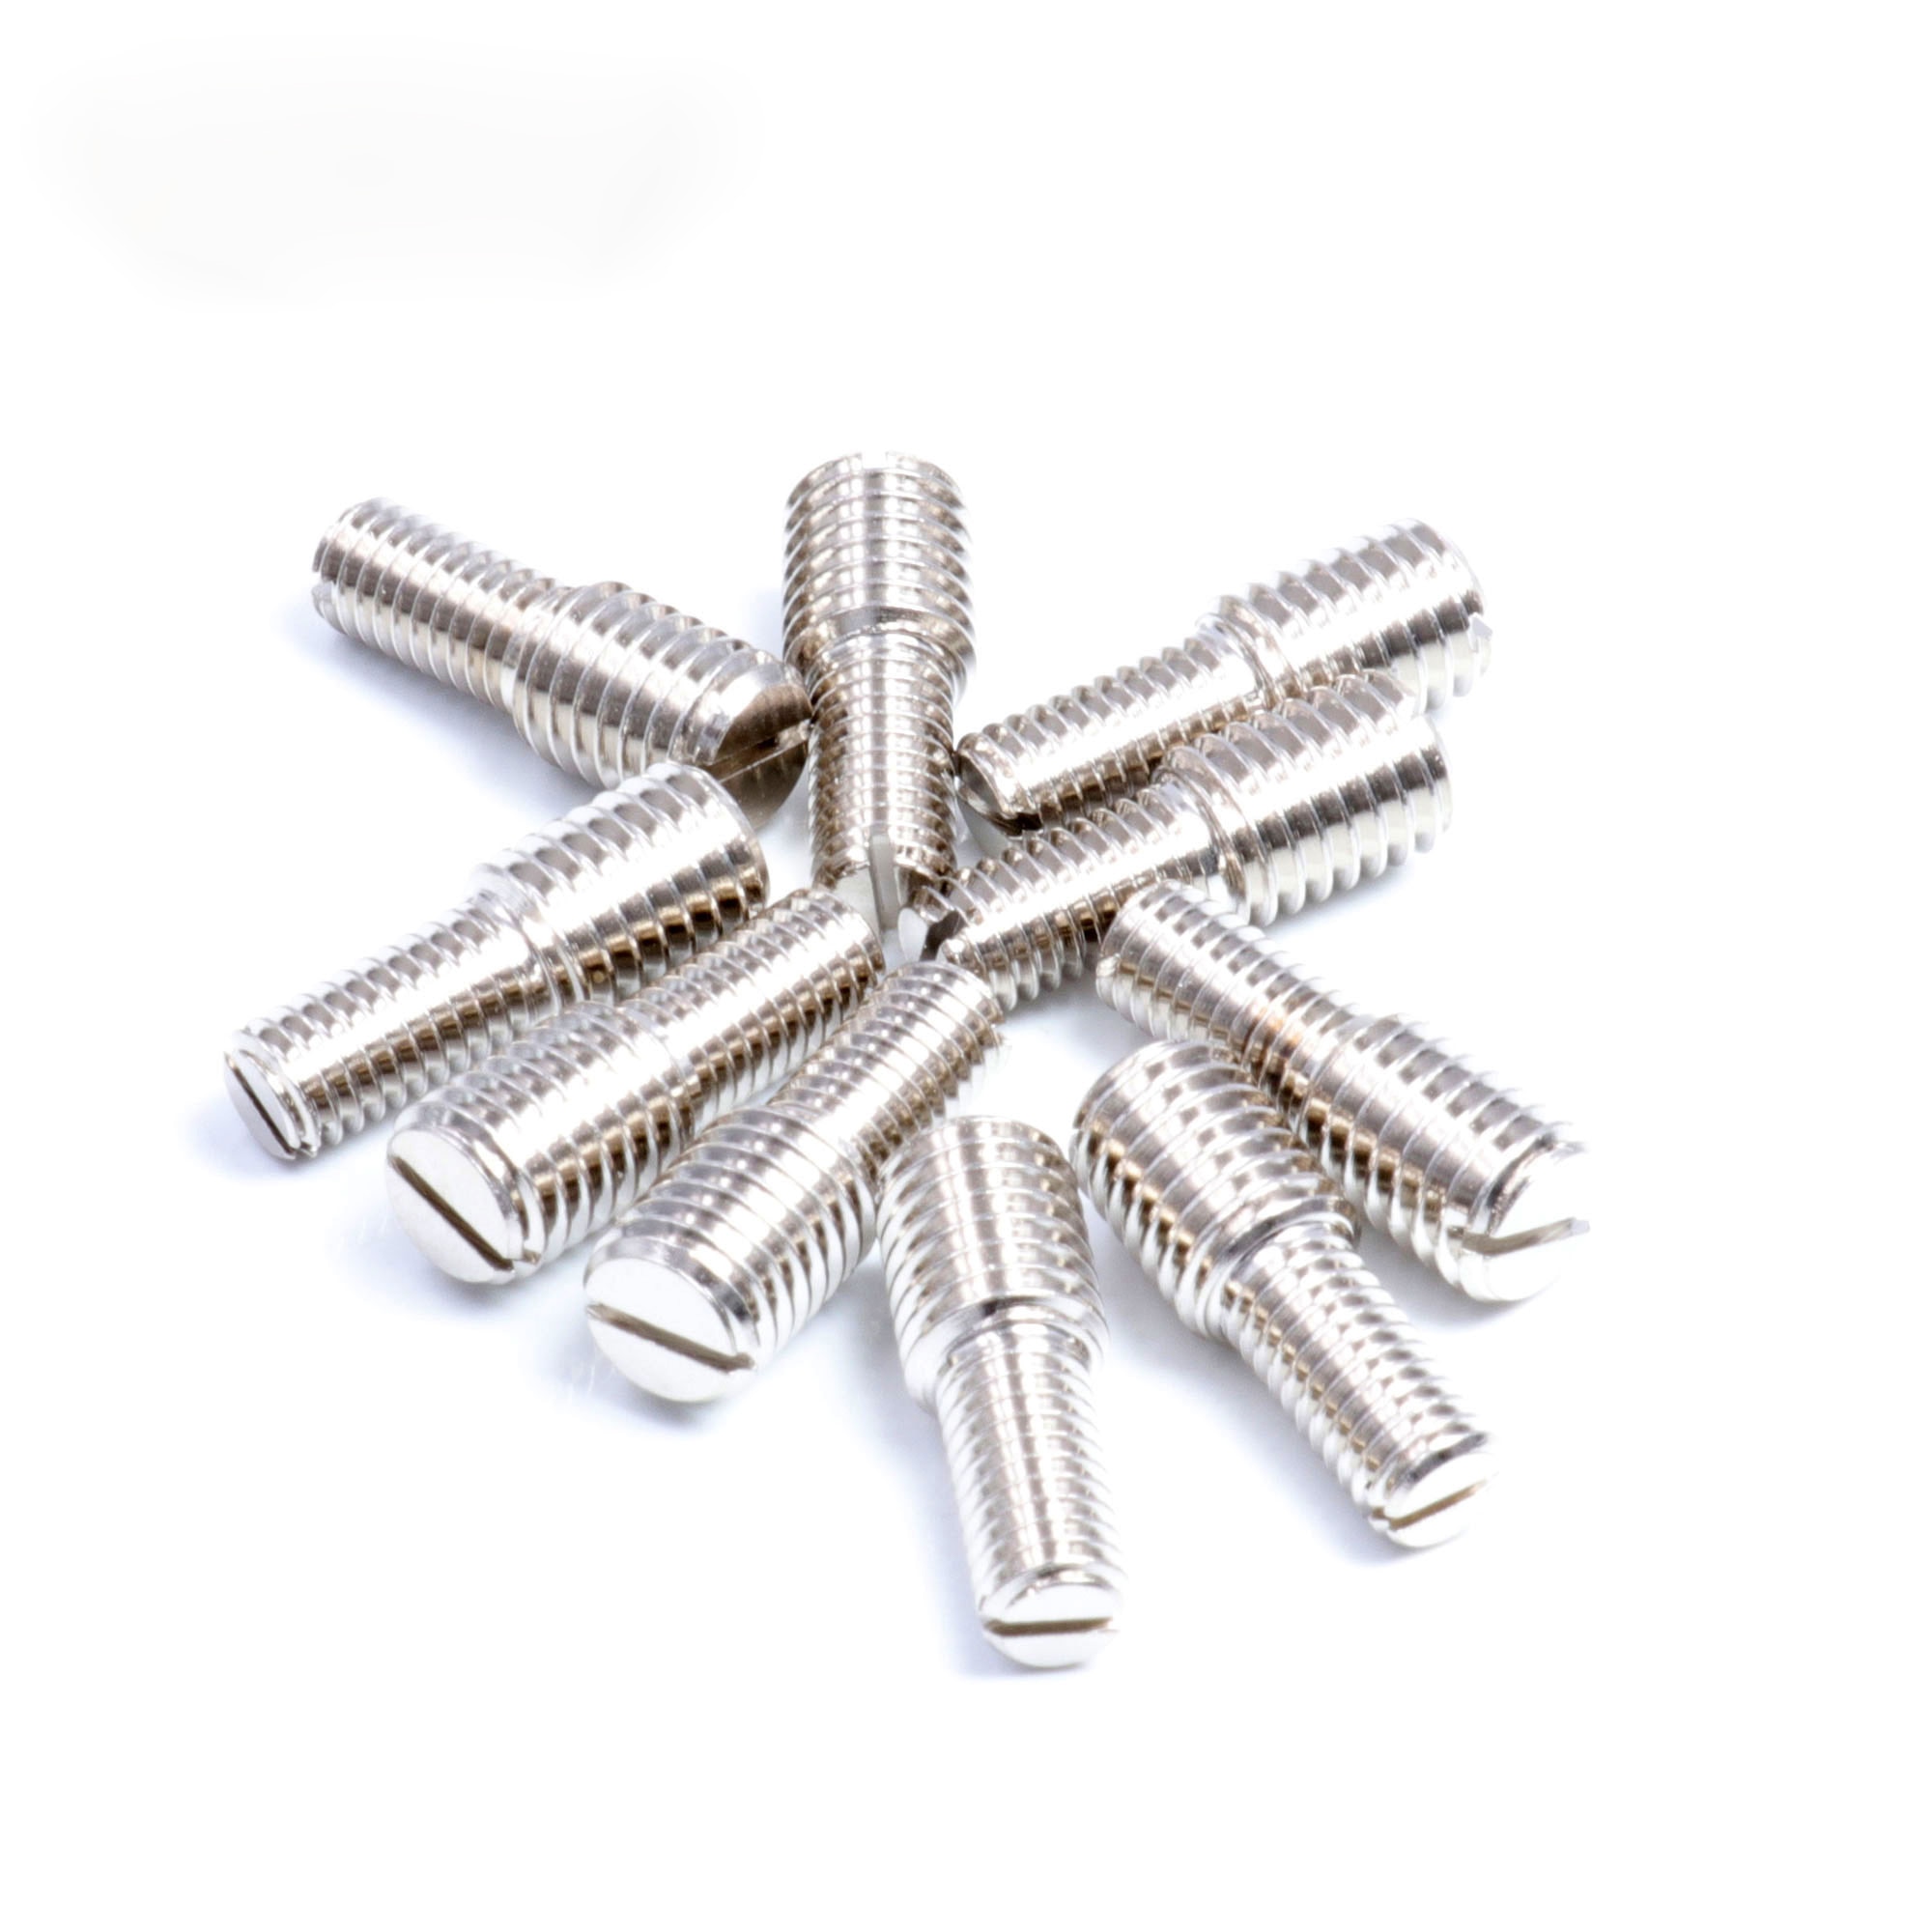 stainless steel M8 to M6 M4 M10 conversion screw variable diameter screw amplifier footpad installation screw M8 to M4